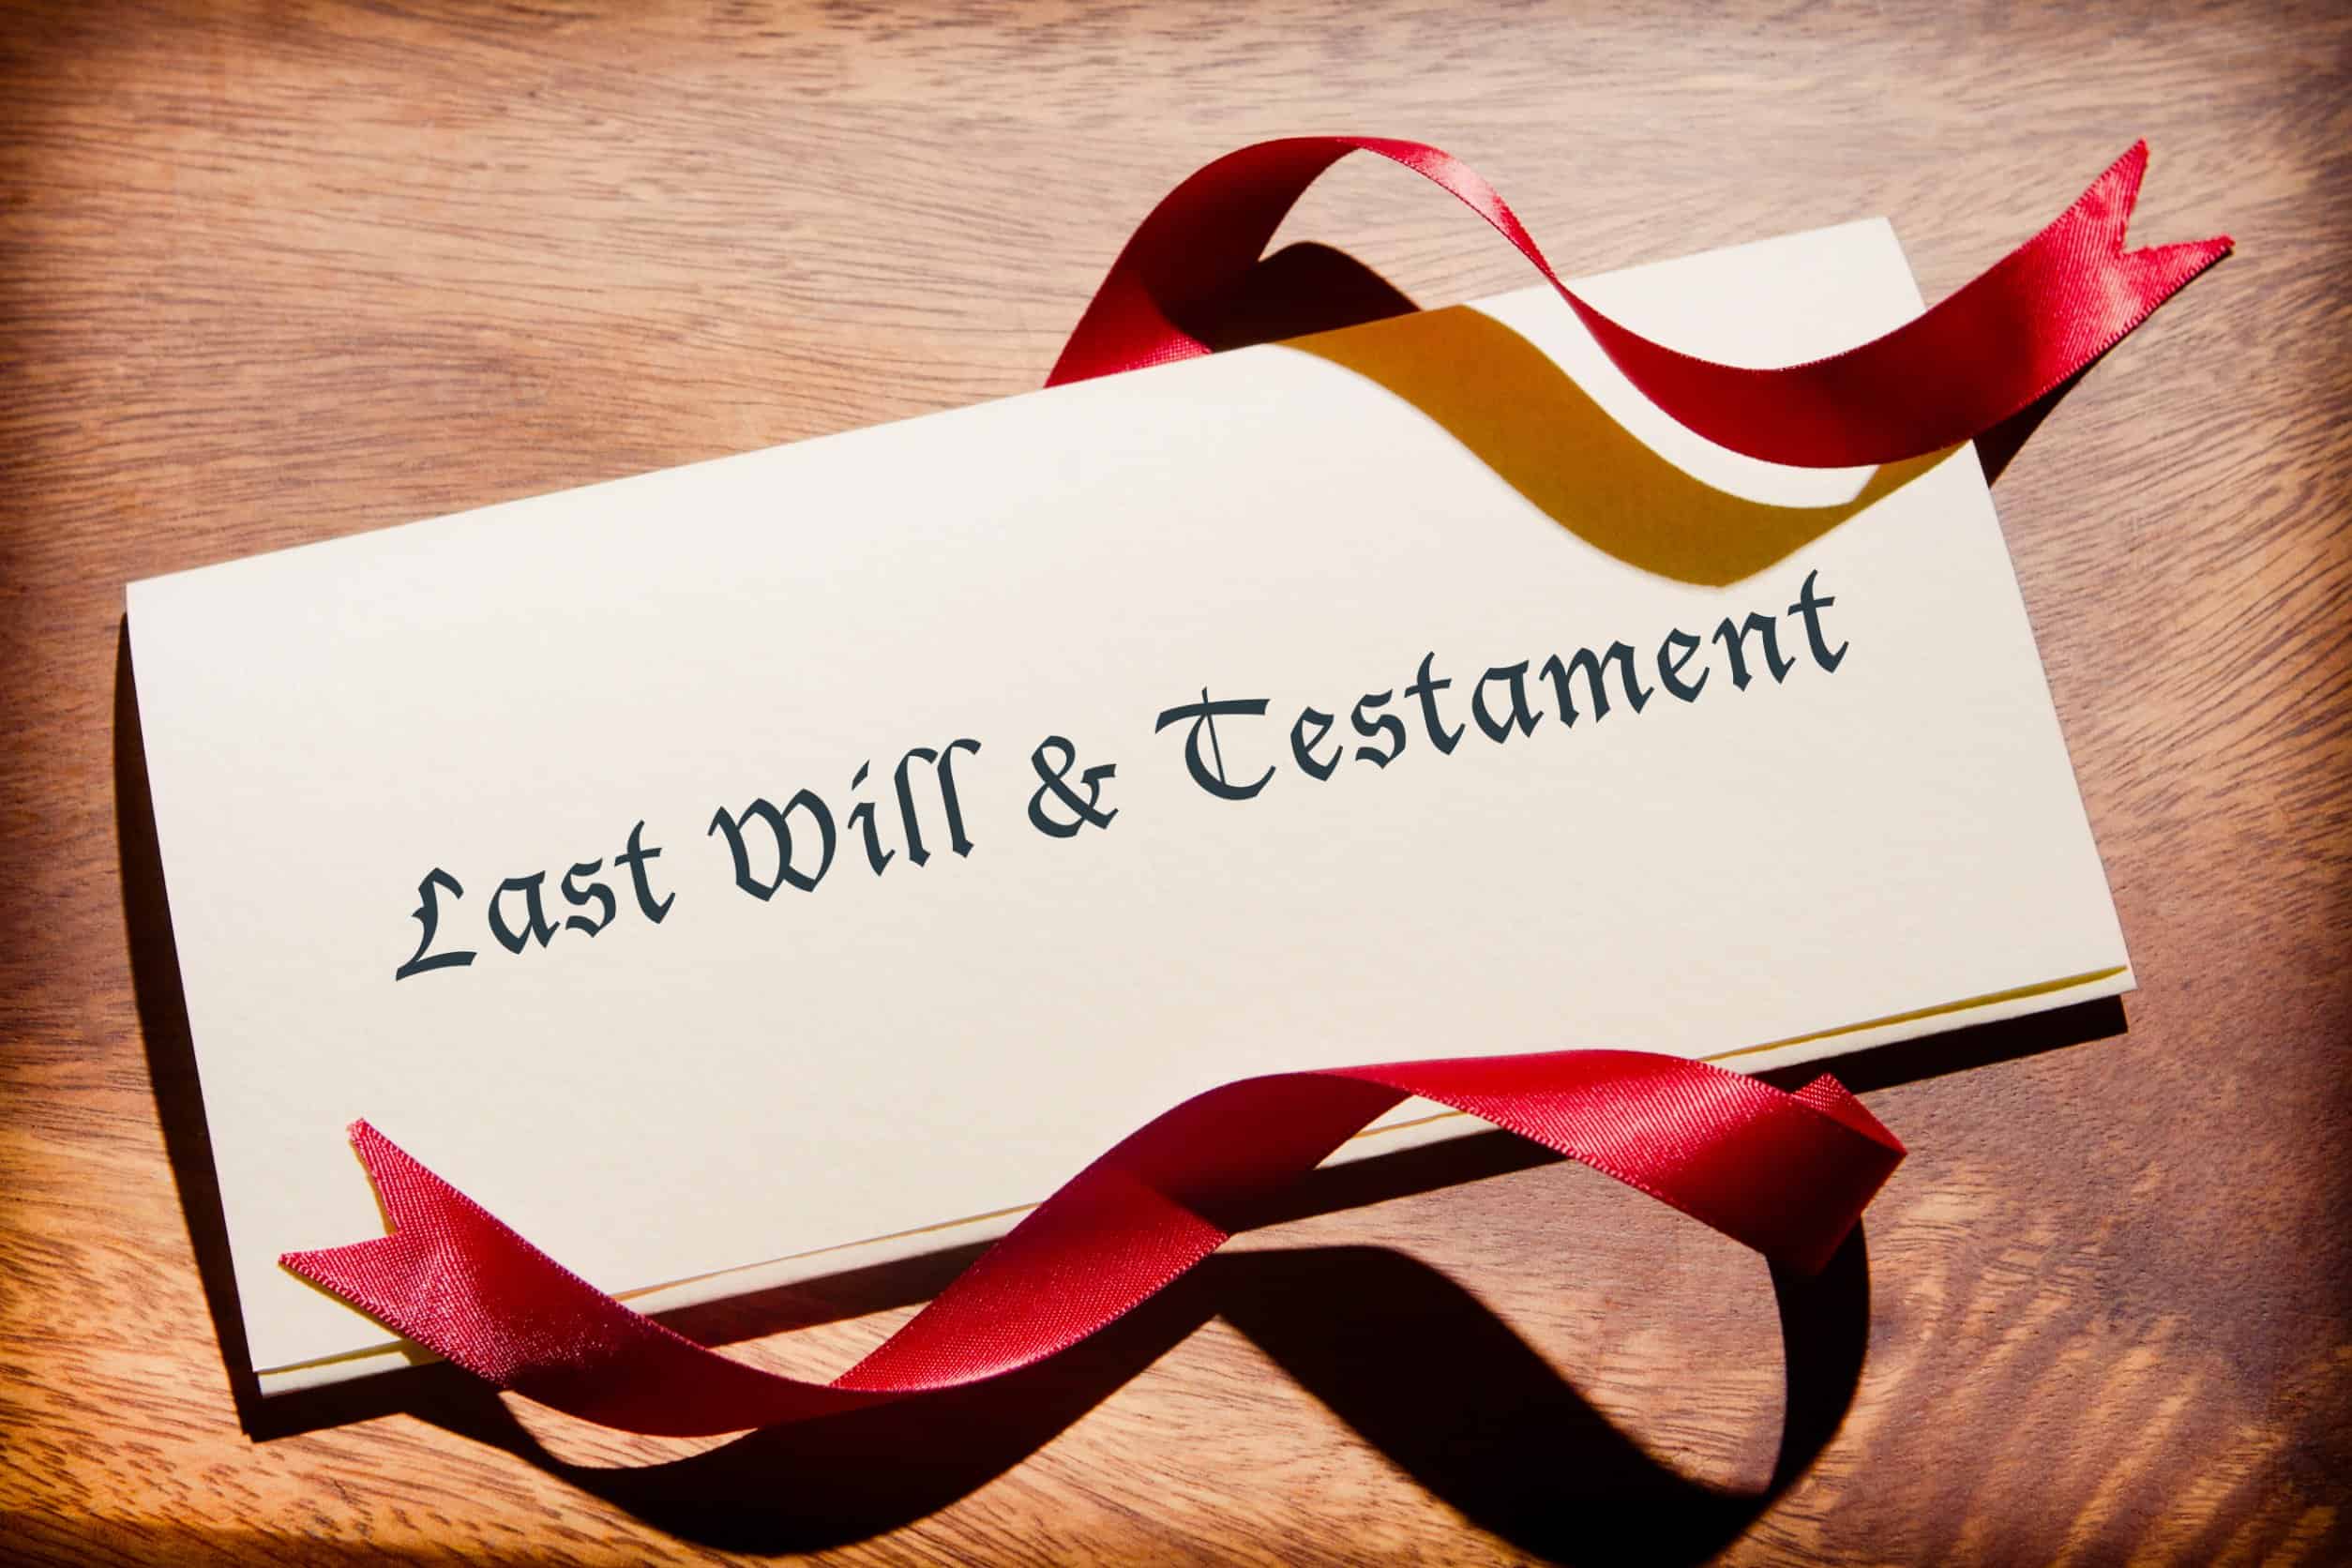 Overhead view of last will and testament document, with red ribbon